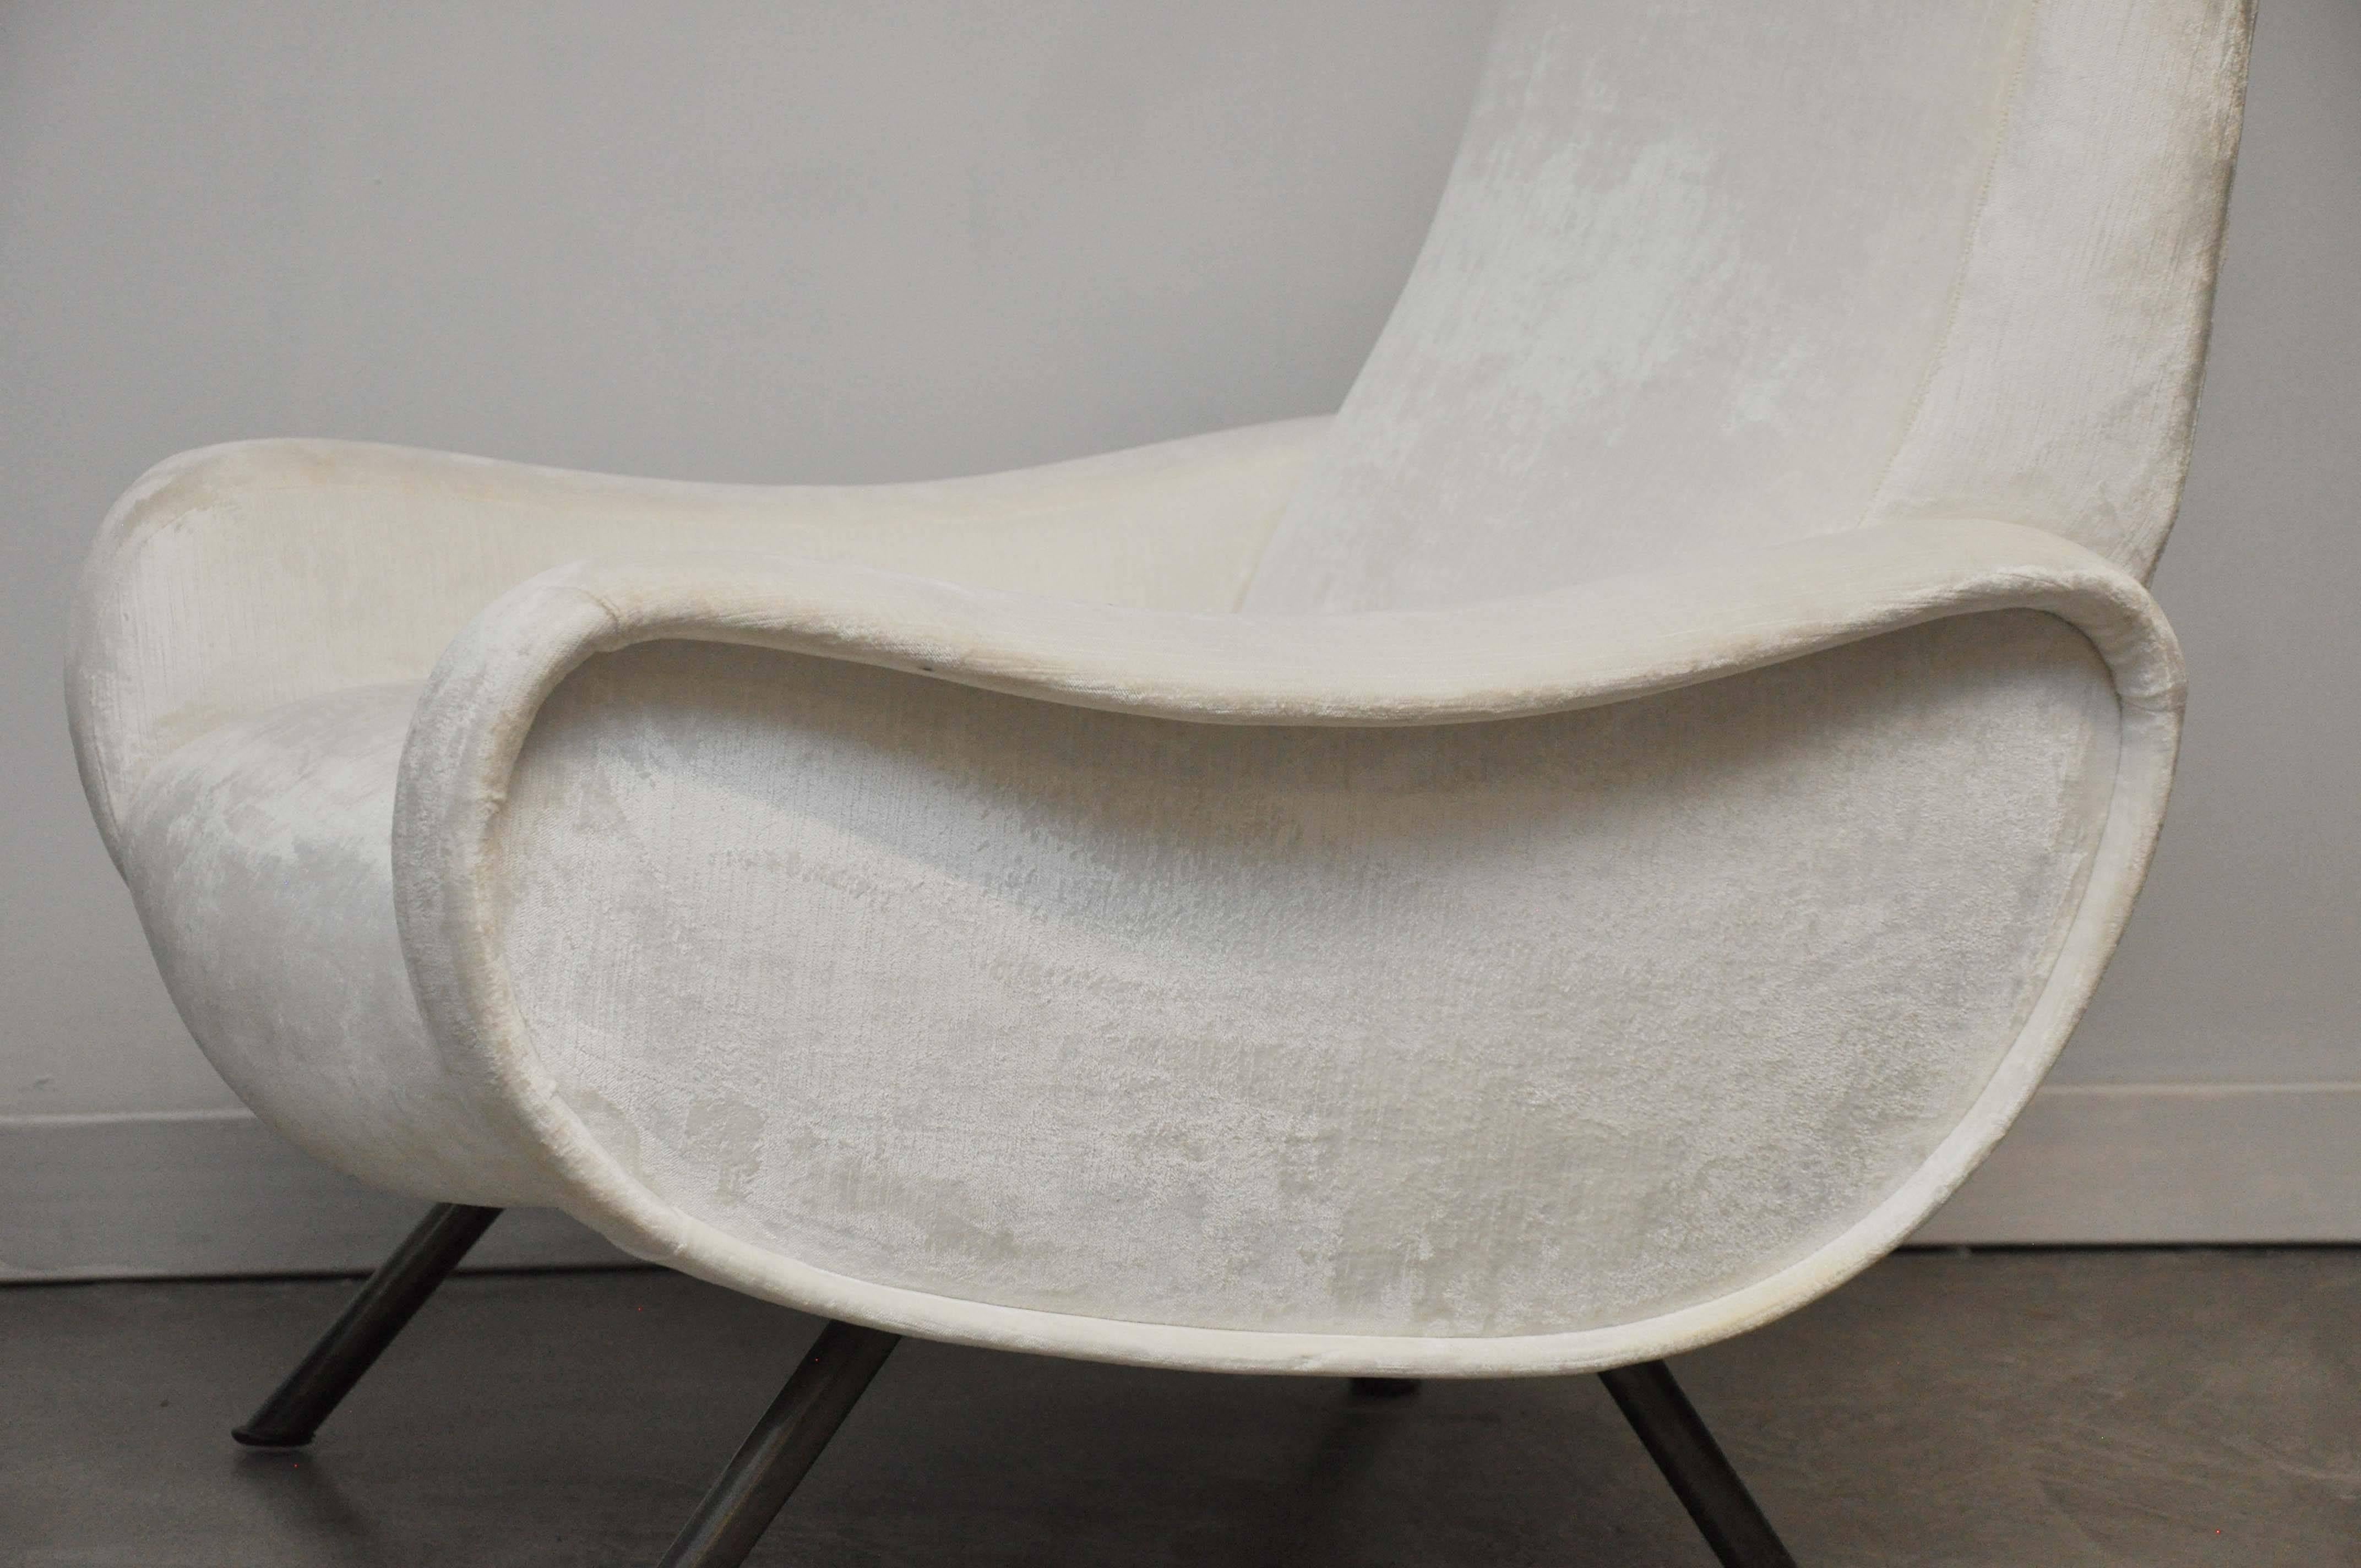 Pair of Lady chairs by Marco Zanuso. Newer white silk velvet upholstery over bronze finish legs.